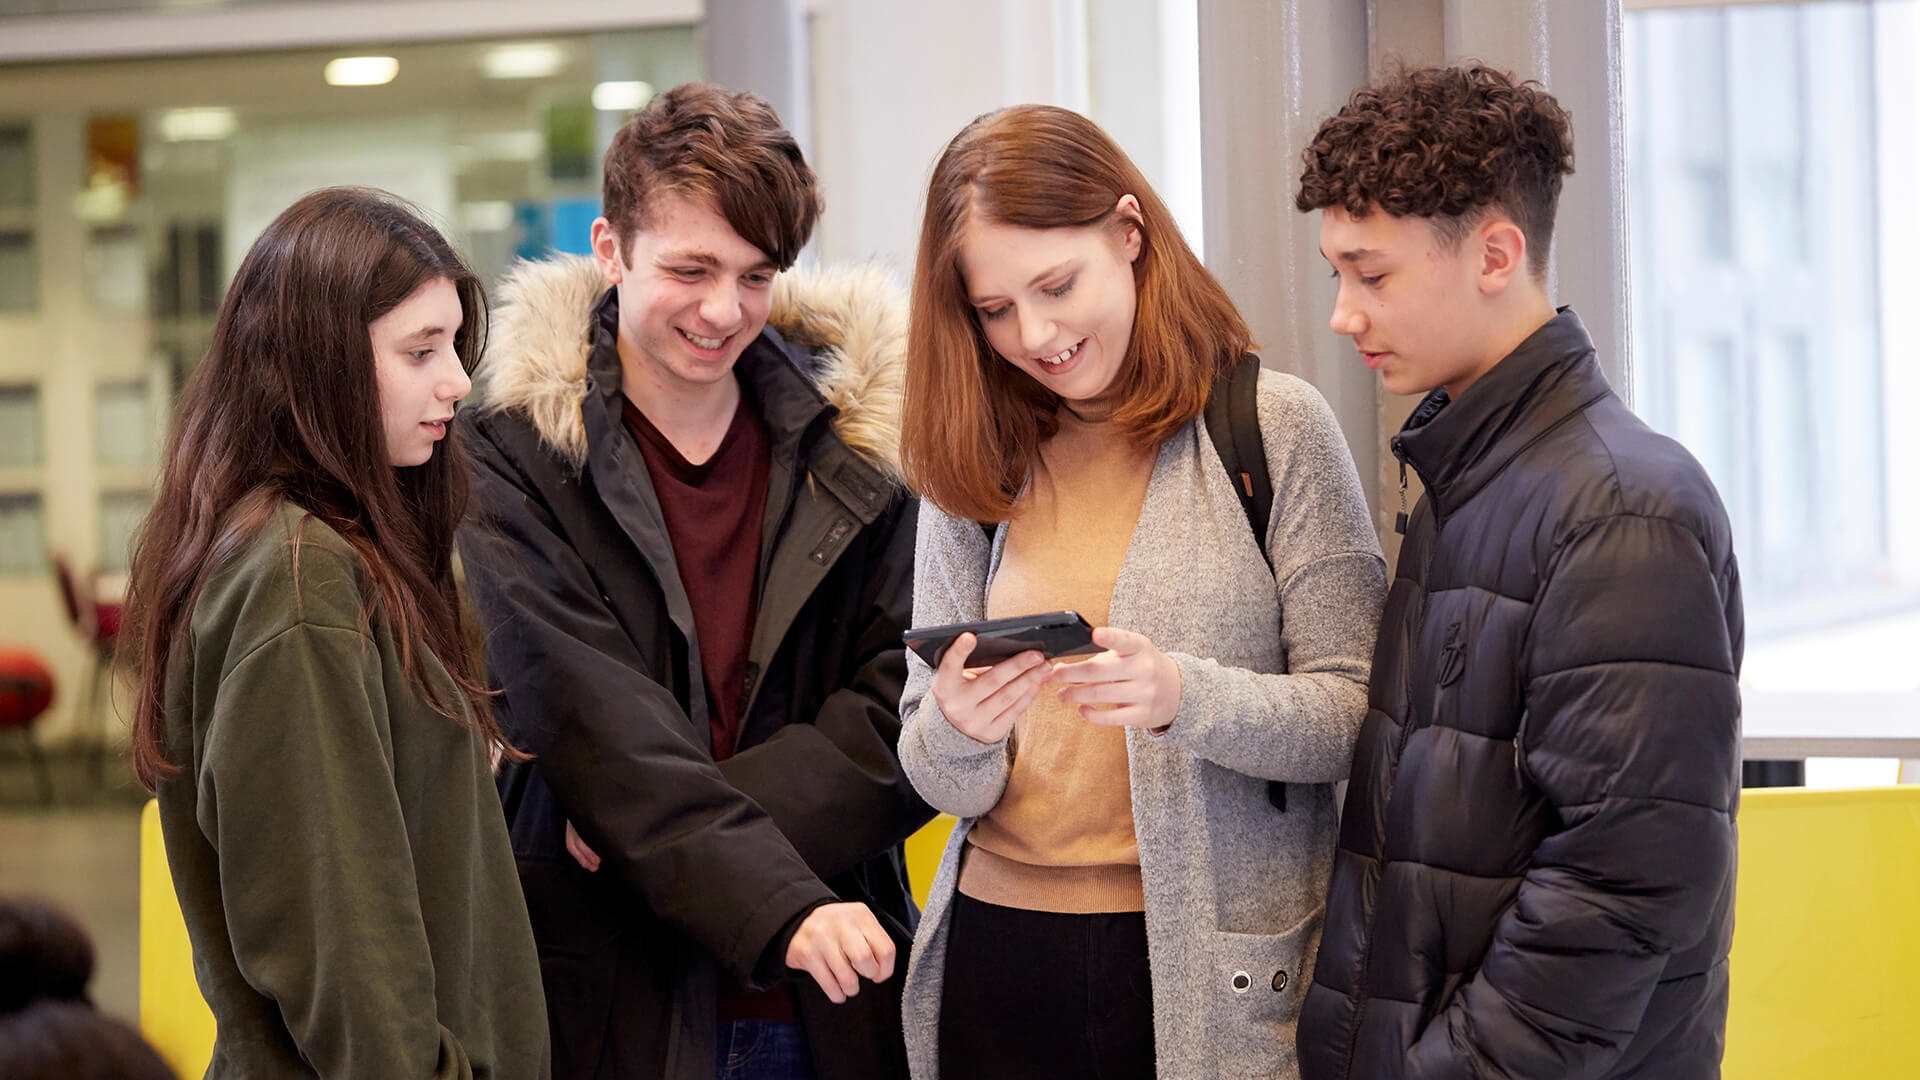 Four young people huddle round together, smiling and laughing, looking at a phone that the person in the middle is holding. They stand inside a campus building.